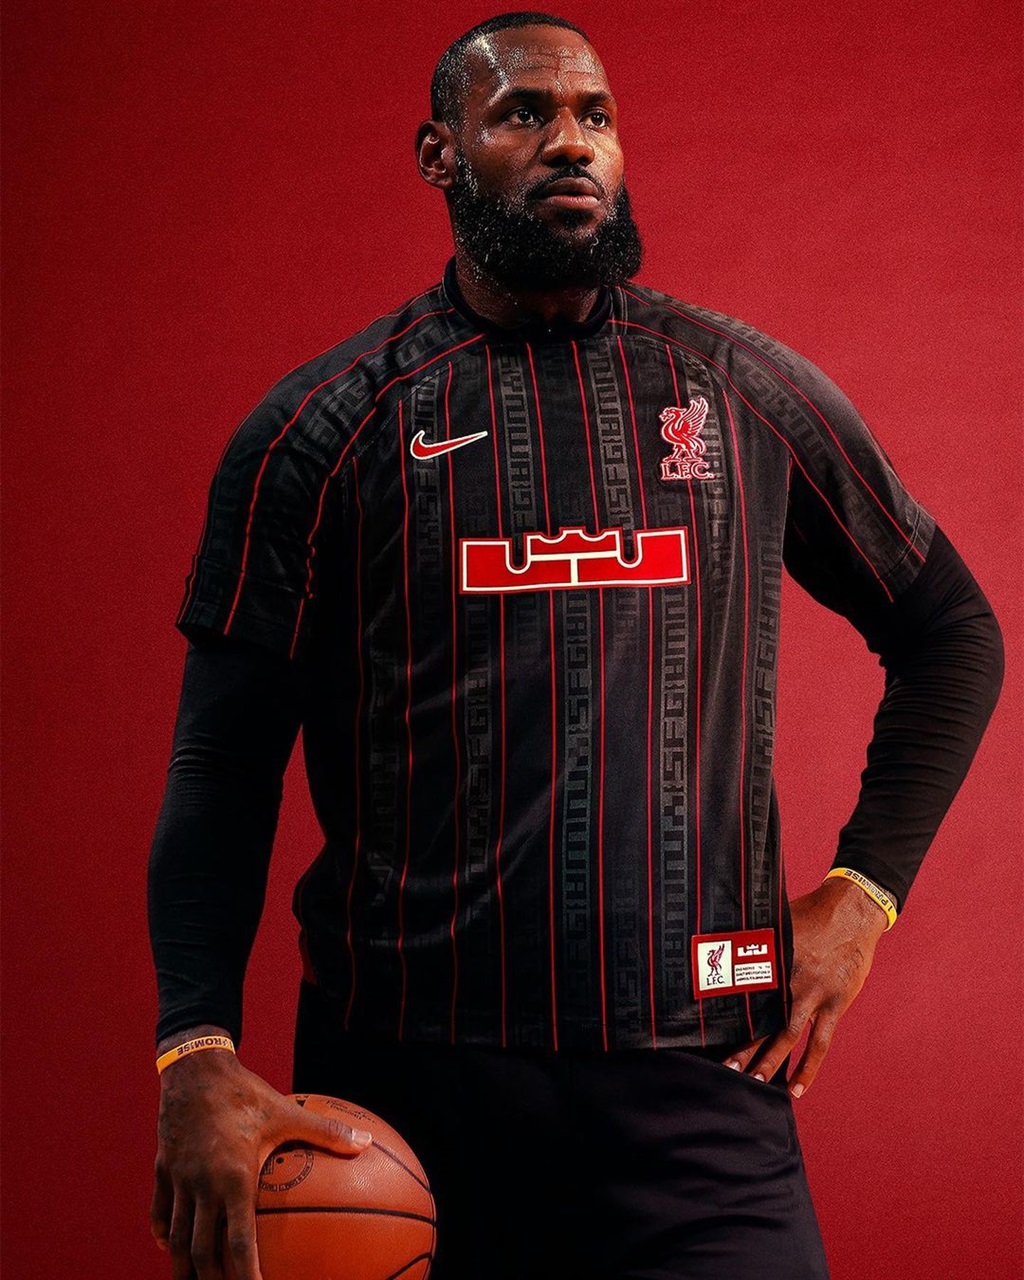 The Liverpool FC x LeBron James collection.